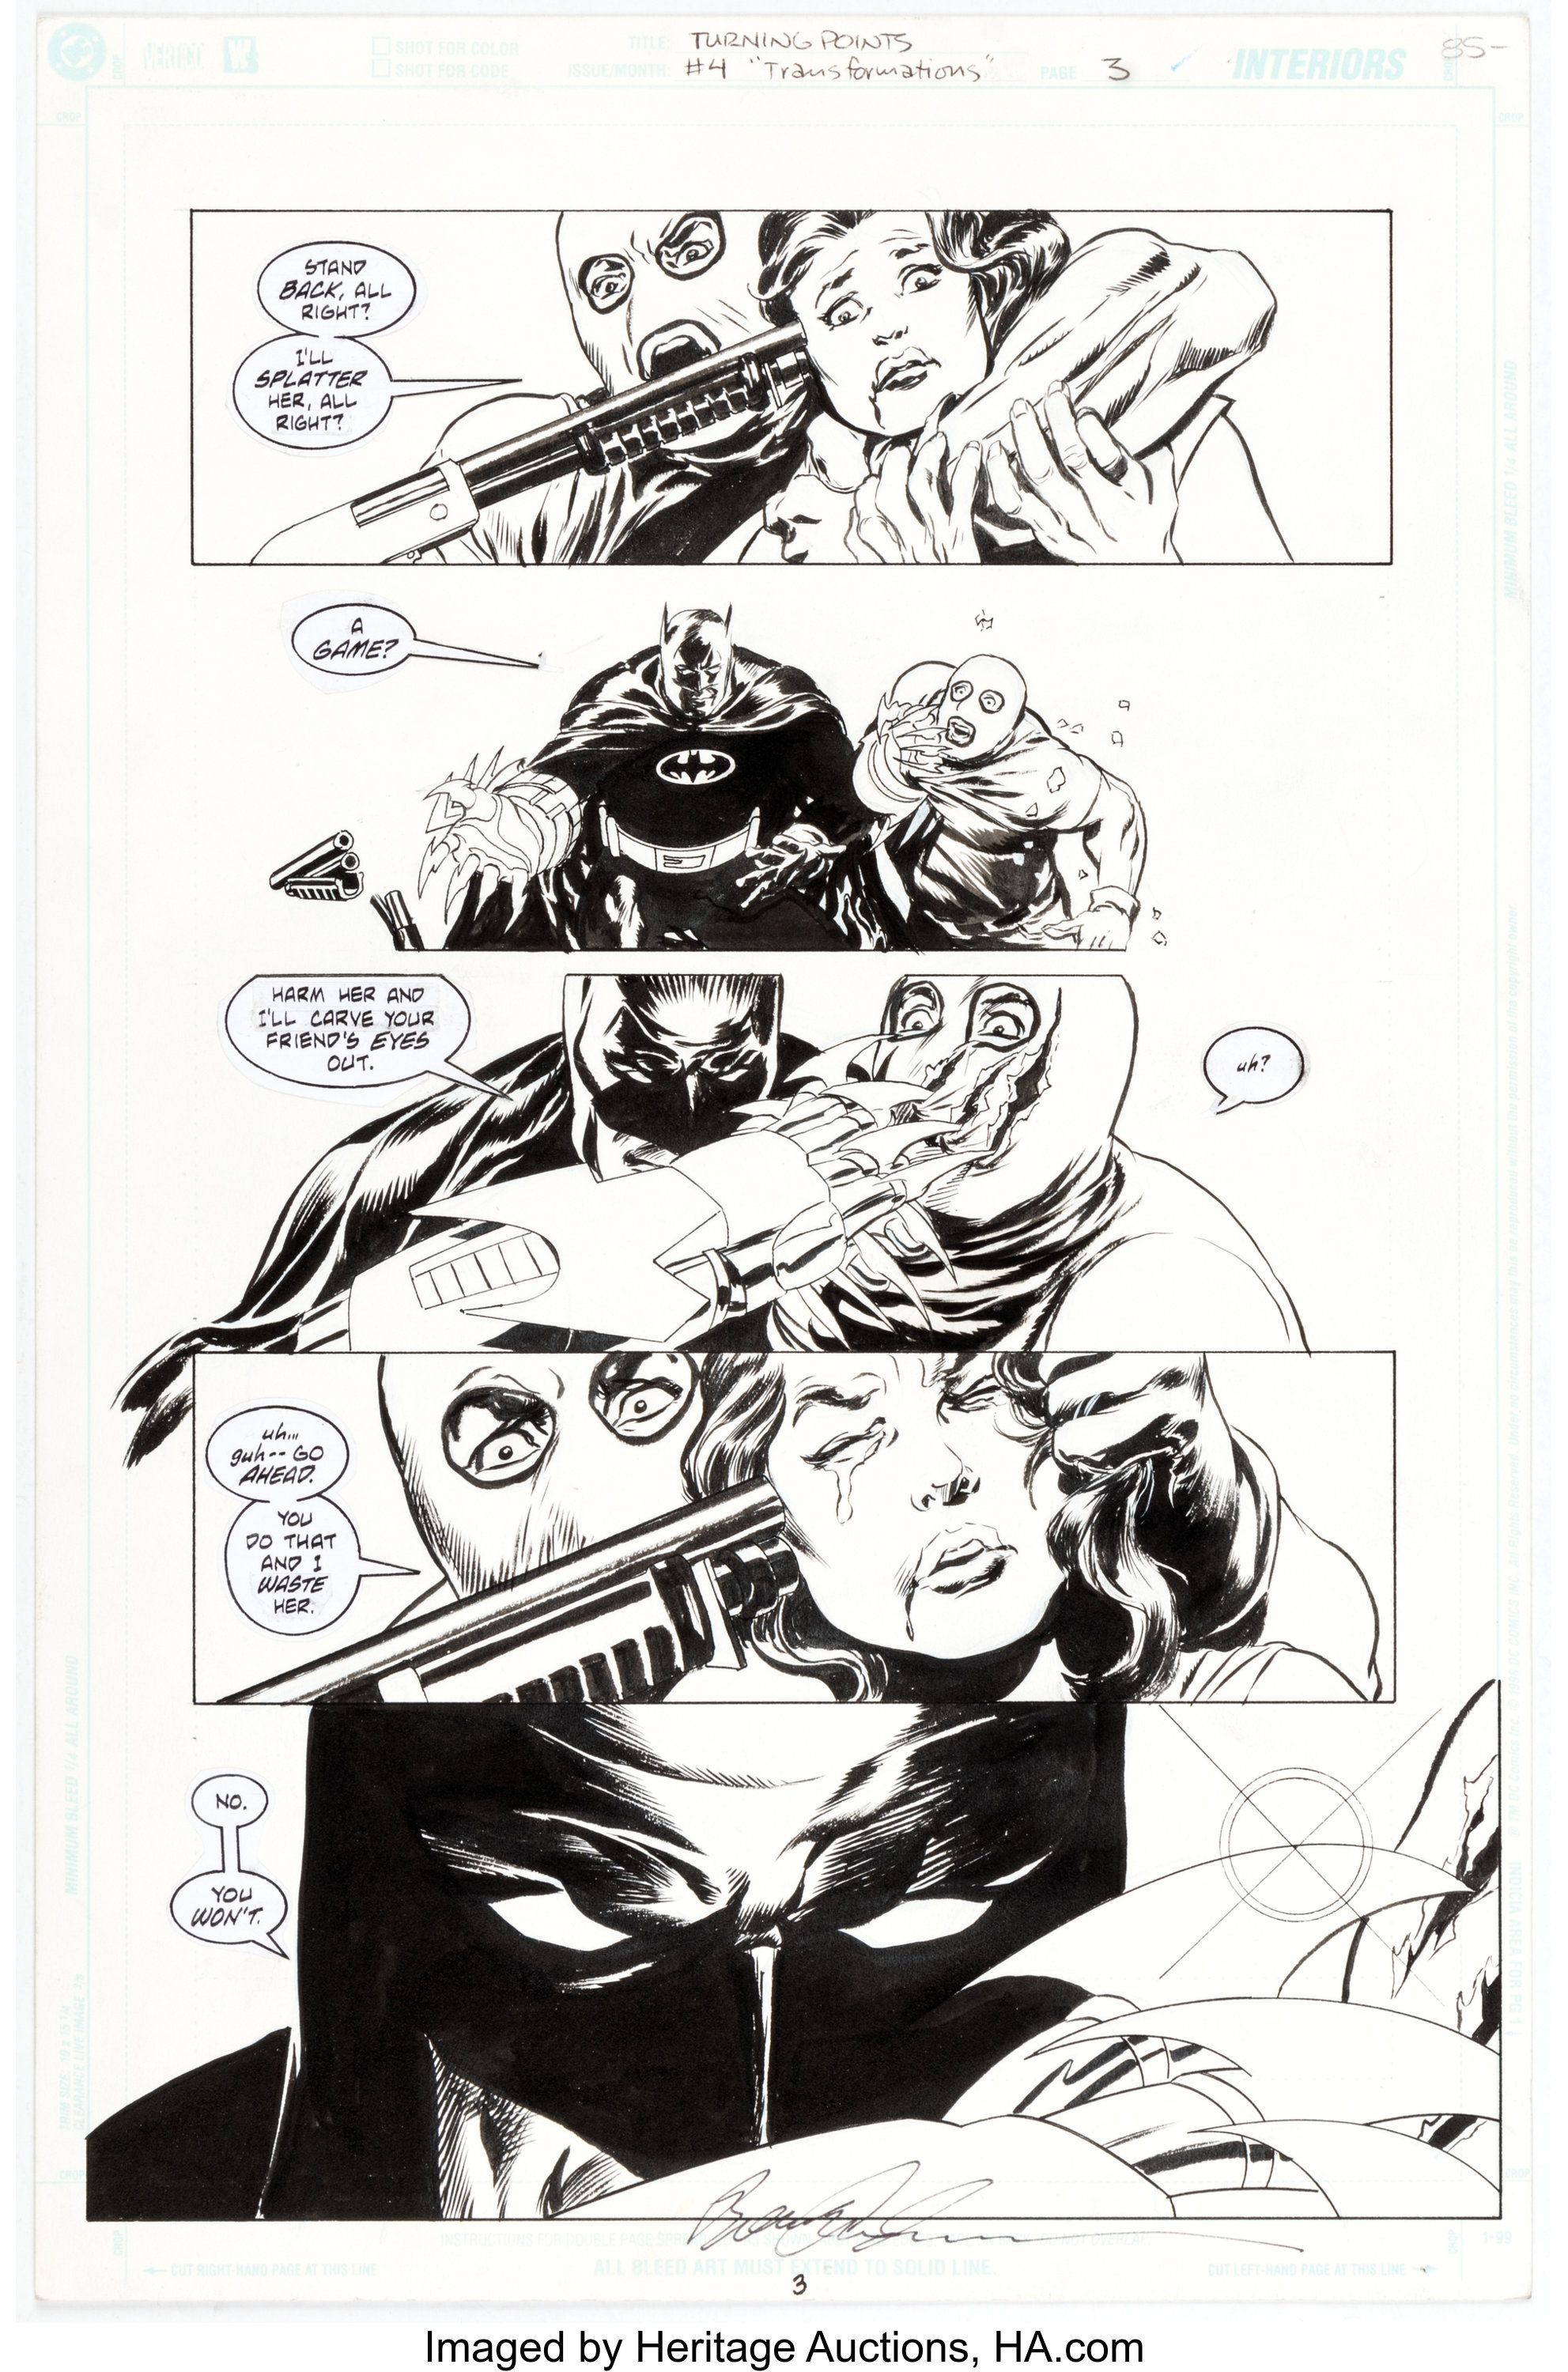 Brent Anderson Batman: Turning Points #4 Story Page 3 Original Art | Lot  #13536 | Heritage Auctions